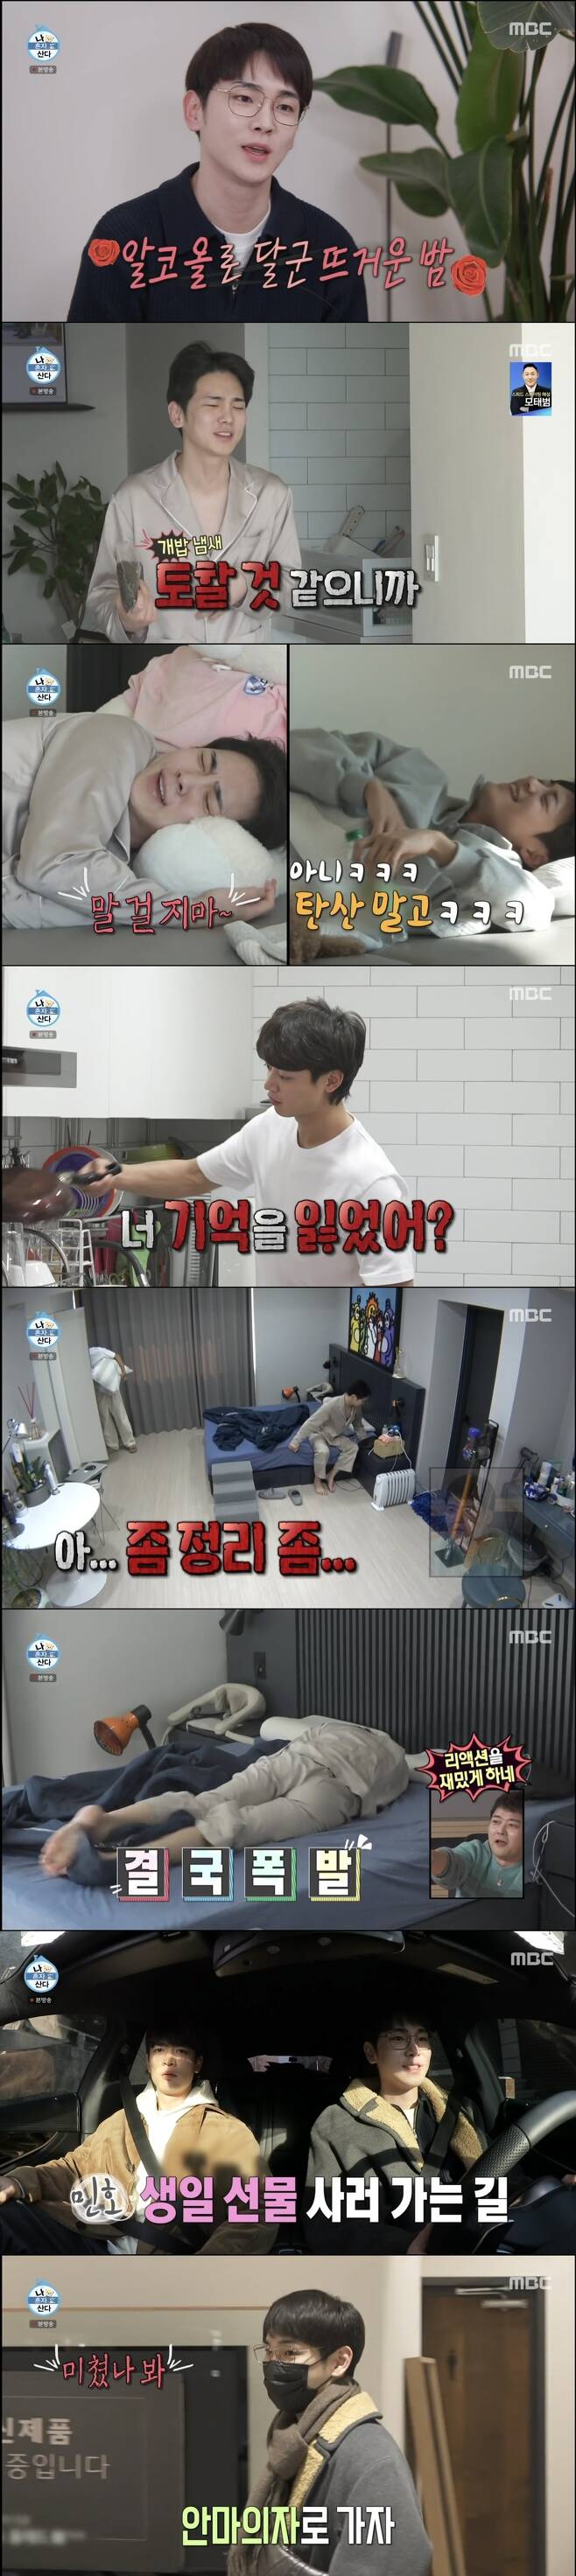 Shiny Kee and Minho boasted the chemistry of the tit-for-tat exchange.In the MBC entertainment program I Live Alone broadcasted on February 18, the key and Minho, who were struggling after the previous days heavy drinking, were drawn.On this day, the key that the Big Hangover did not go to was found to be hydrated as soon as he got up and sleep in the living room.I asked, and I remembered the intense day before. After a hot night with Minho and manager, the key who started a painful day complained of I think I will die.Jun Hyun-moo said, How much did you drink? And Kee replied, Minho is not the style to count it.As I know, Chois brother eats well, but he keeps eating without drinking, Kodkunst said, referring to Minhos commonality with Friend.Kee said, When someone comes, they tell me to buy alcohol, and they buy enough to buy it, and they eat it all. They eat all the alcohol in my house.Jun Hyun-moo added: I have wine in the winery going into effect, just one thing with Feelings.Key, instead of bringing water to Minho, was a dog, and he was sick of the smell of feed while taking Garson rice. I drank too much yesterday.Yesterday, when I danced, it was your fault that I did not dry. Minho said, You had a concert yesterday. I played 20 songs.I do not have enough capacity on my cell phone, he said.Minho said, This is not one piece. You suddenly boasted of biceps.Because of the endless nagging of Minho, the key that talked like a couple who did not even say a word to each other finally asked, Baby stop.Minho said, Those who see it for the first time can think of it as fighting, but it is everyday. He also admitted, This is not fighting.Minho asked for the dishes, saying, Are you going to order me to wash the dishes now?I responded with a Settai, and Kee said, Its the dishwasher role, but why are you so upset? Minho said, I feel like I have to clean the dishes with my hands and feel the feeling of Feelings. The key said, Then I go to the stream and wash.I wipe it clean enough for you to think about. Minho gave a pin to Minho. Minho has a lot of nagging, but eventually he listened to the key.Minho said, I am angry with my body, I am always angry with my body, and I always put it on my feet. Then Kodkunst said, I have to put my pants on and send it to nature.It is built in the city after three years, he laughed at Minho. It was Cettai and angry, and it was Dere Minho who eventually cleaned it.But then Minhos nagging began, and the key exploded and rolled his feet. Kodkunst, who watched them, commented, I see why they do that.Minho, who was organizing the closet of the key, said, You are deceived. When I use the hotel with me, it is gorgeous, but it is dirty than I thought.Kee said, I just want to find a flaw in my life, and I have tried a hotel room with him and a hotel, but it is not neat and neat. I just want to find scratch.I just want to eat hamburgers because I feel like I am a seafarer. Minho also did not lose, saying, If you ate yesterday, you should do it together. Lets eat what you want to eat.Im so angry. Minho, who saw it, said, Im so happy. I enjoy it every time I see it.I think I do more because I like the reaction too much. The two men completed the sea with a hearty egg, and Minho removed the kitchen instead of the difficult key.There are times when courage dominates fashion, said Kodkunst, who saw two people wearing stage costumes in the past before going out.Minho wore costumes and hats reminiscent of Woody in Toy Story.Kiwa Minho visited the electronics store to buy Minhos birthday present. Minho, who does not choose gifts well, said, Im sorry.I know the mind of the rider, but Settai hit, but I was sorry that I could not choose it. Minho said, I can not.Then lets go to the massage chair, he said, and Kee said, I think Im crazy. If you buy this, you have to come to me. Minhos massage chair was an expensive price that required a monthly payment of 220,000 won for 36 months.After all, Kee presented a TV monitor for Minho, where the two arrived after shopping at the Sundaegukbap restaurant with deep memories. Kee said, It is a place with memories.I have been on schedule since Minho and I were trainees, he explained. The key who had been suffering from The Big Hangover a while ago was not tempted and drank sea cucumber.Key, in a sense of self-defeating, I gave up being a person; I am not a person, caused a laugh.Kee said, Minho was born and I would have seen someone like me for the first time, and I saw someone like Minho. I was a strong person who was a self-reliant person.If you are next to this person, it is natural Feelings. Minho also expressed his affection for Minho. It seems to be standing in opposition, but it seems to be the closest friend.Thank you Friend, she said, expressing her fondness for the key, literally the reason why the opposite was attracted to her.